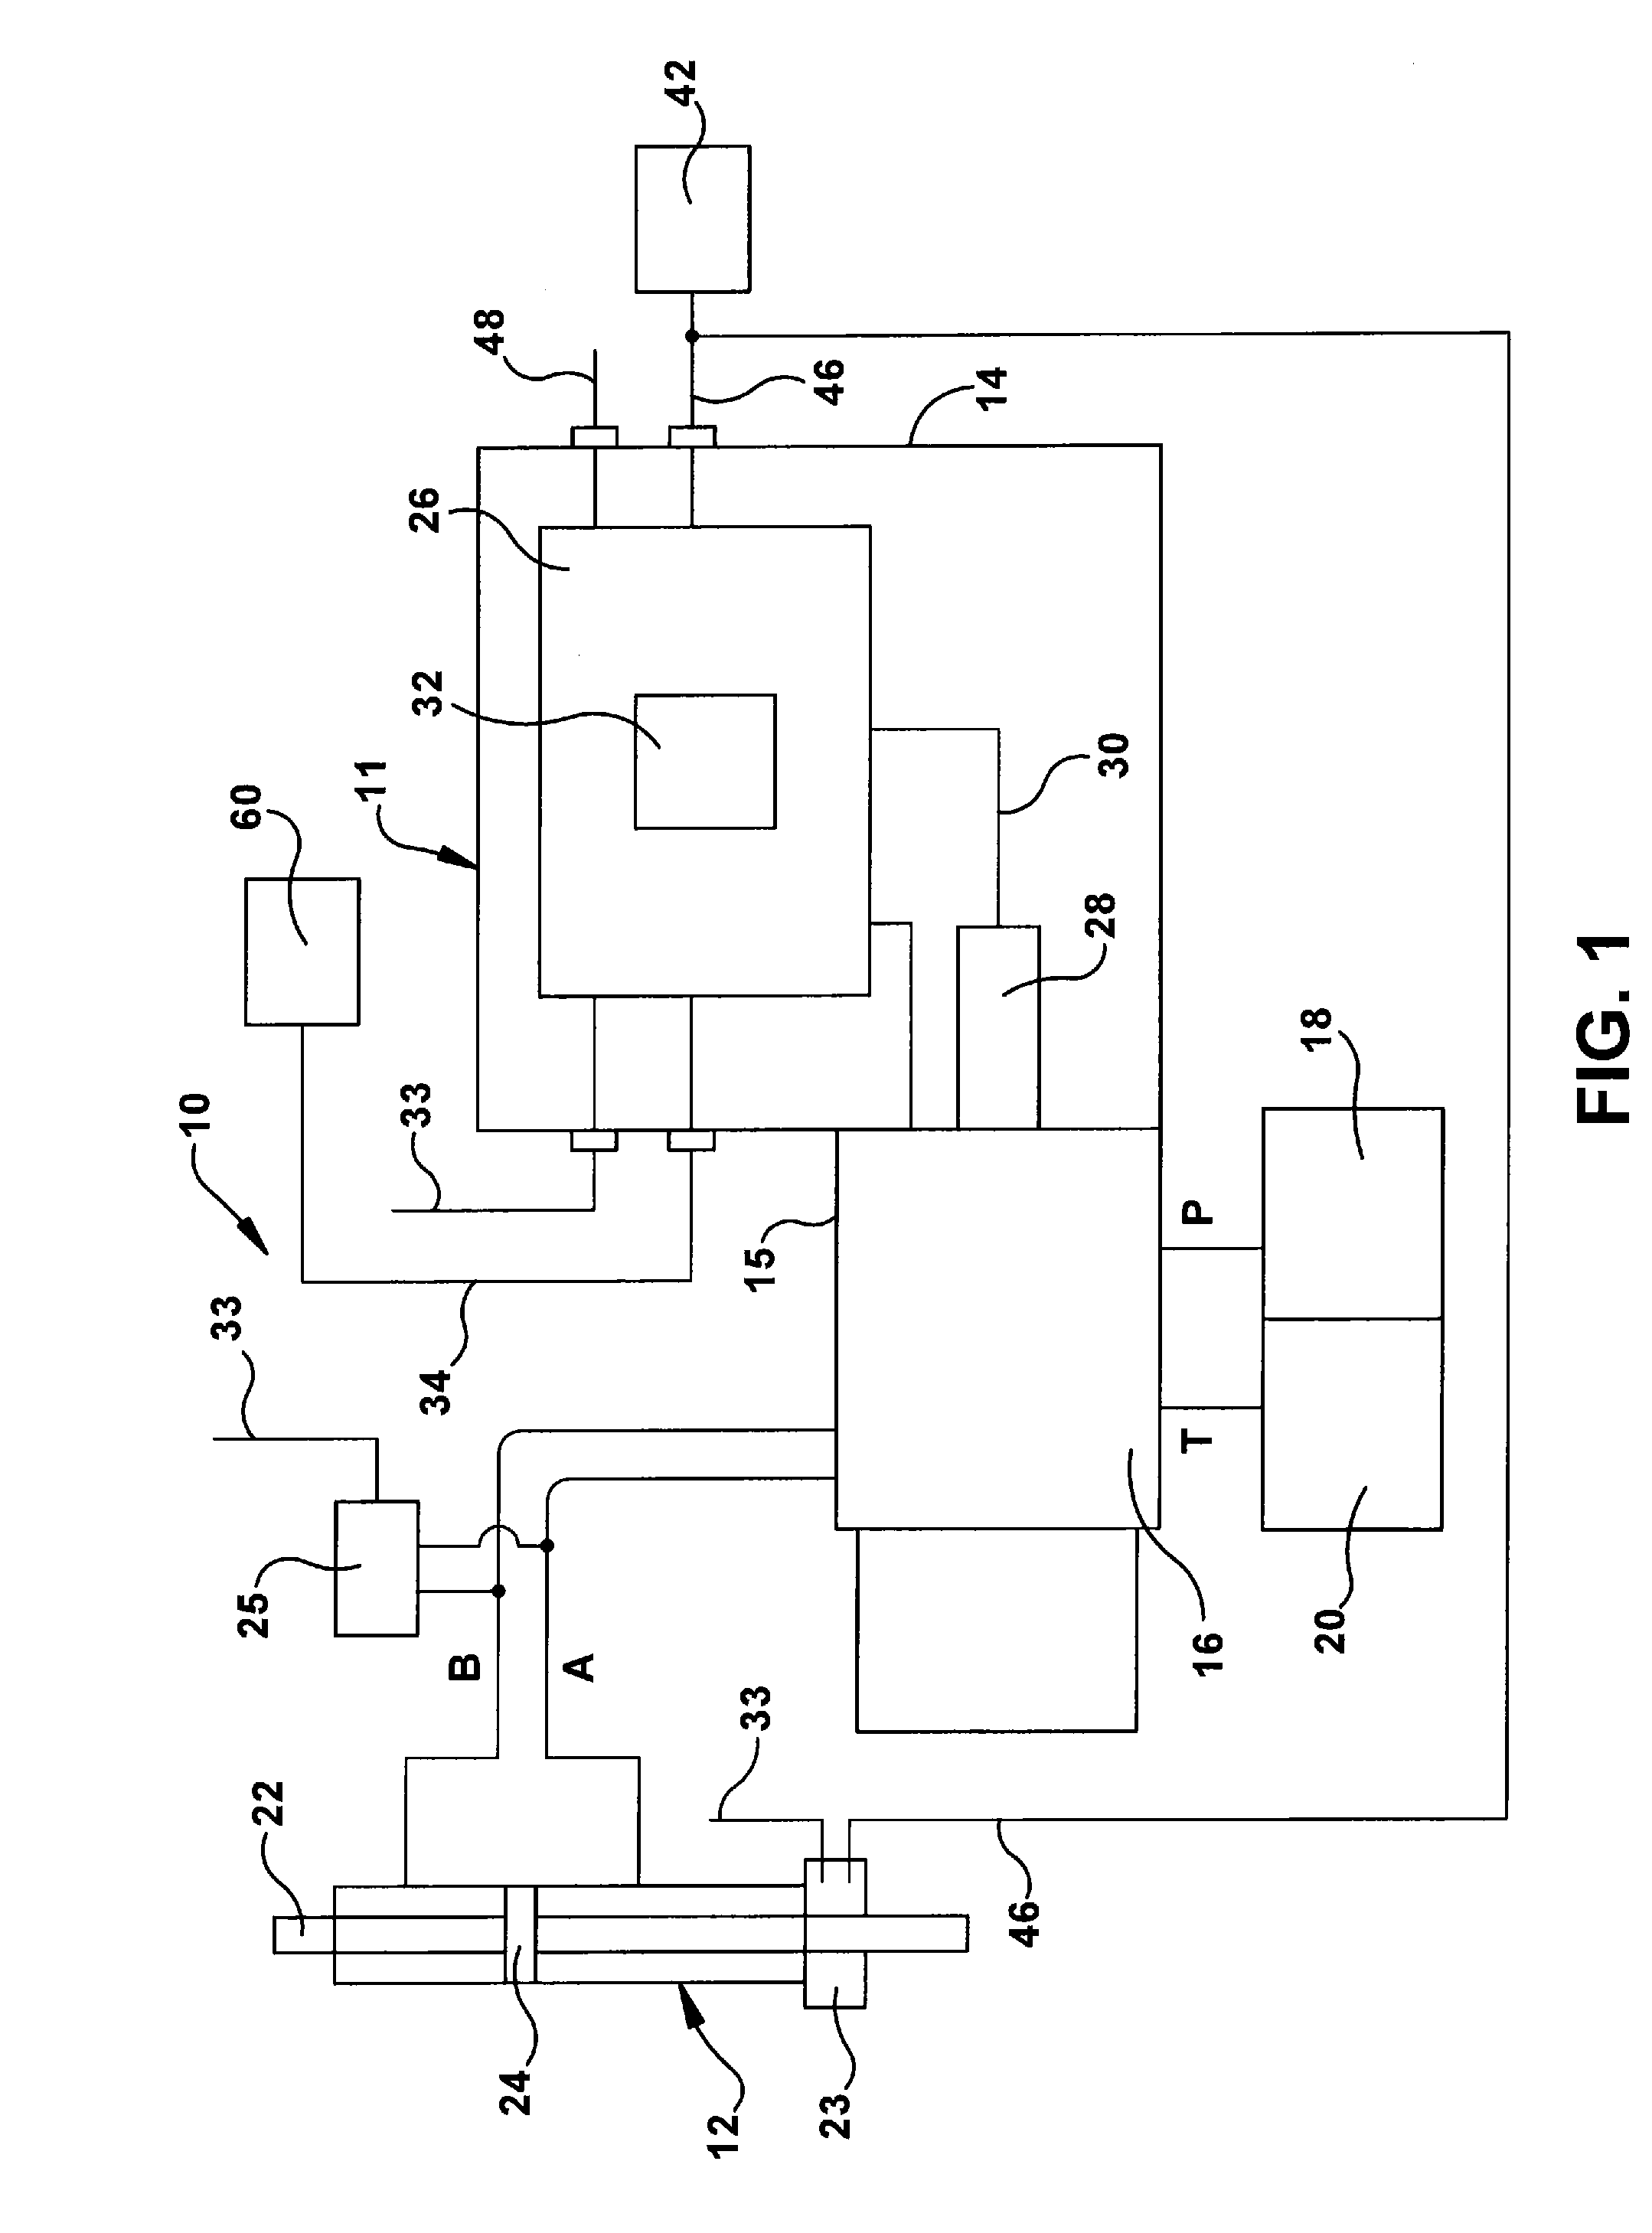 Device and method for controlling a fluid actuator